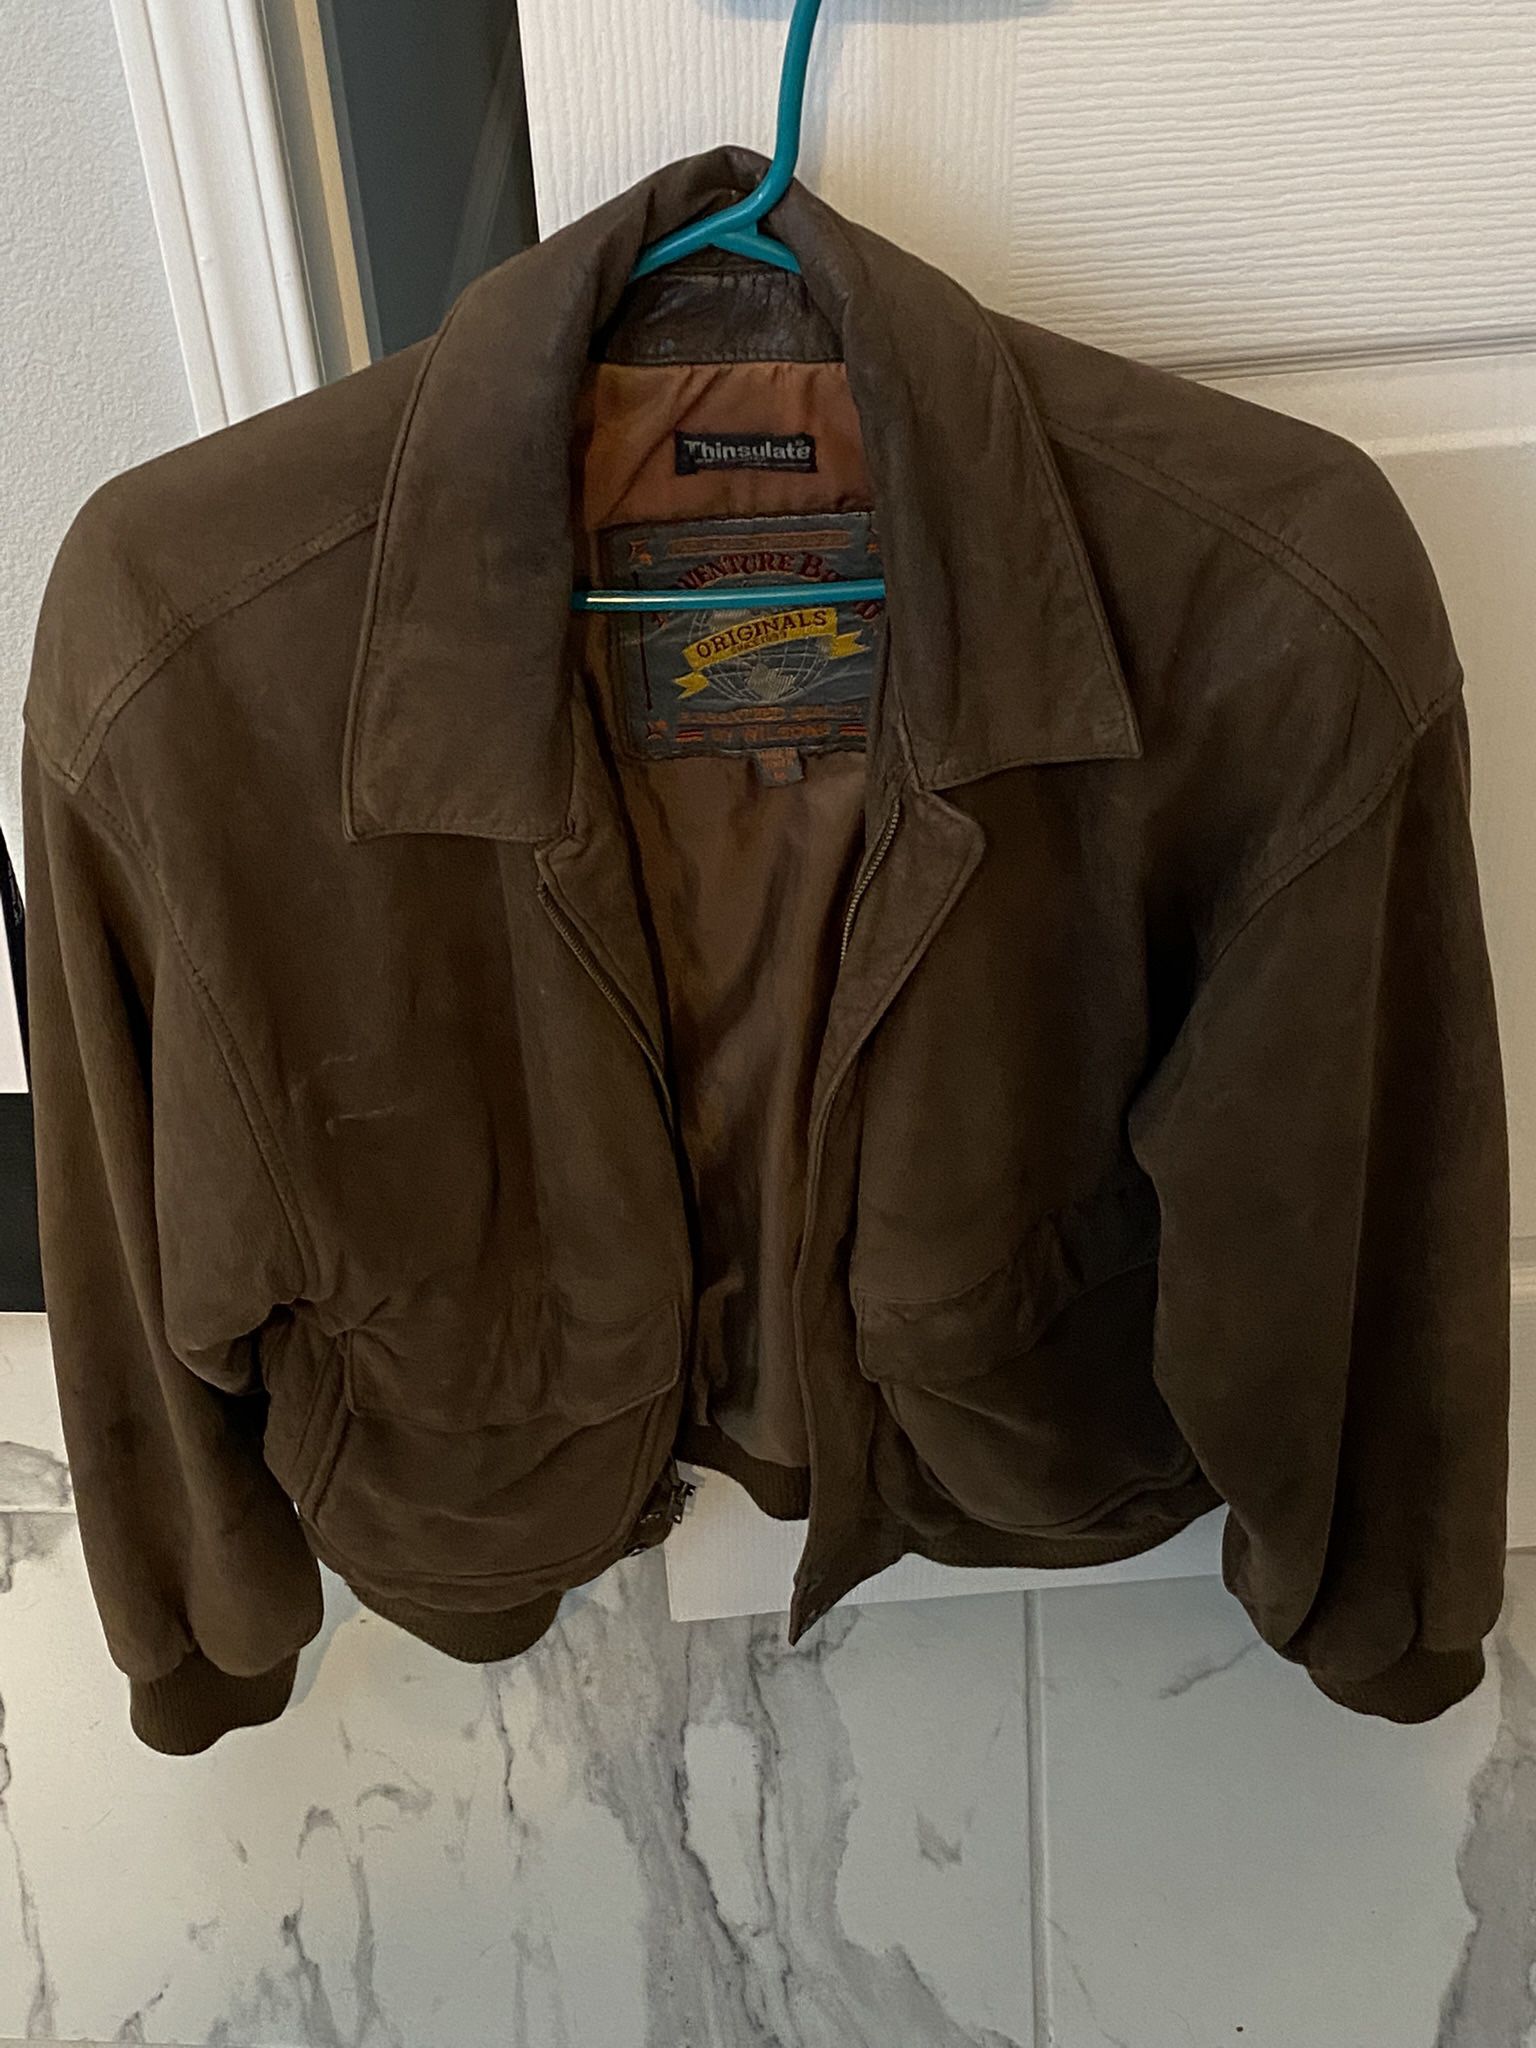 Leather Bomber Jacket Adventure Bound With Thinsulate Thermal Liner by Wilson’s Leather. 